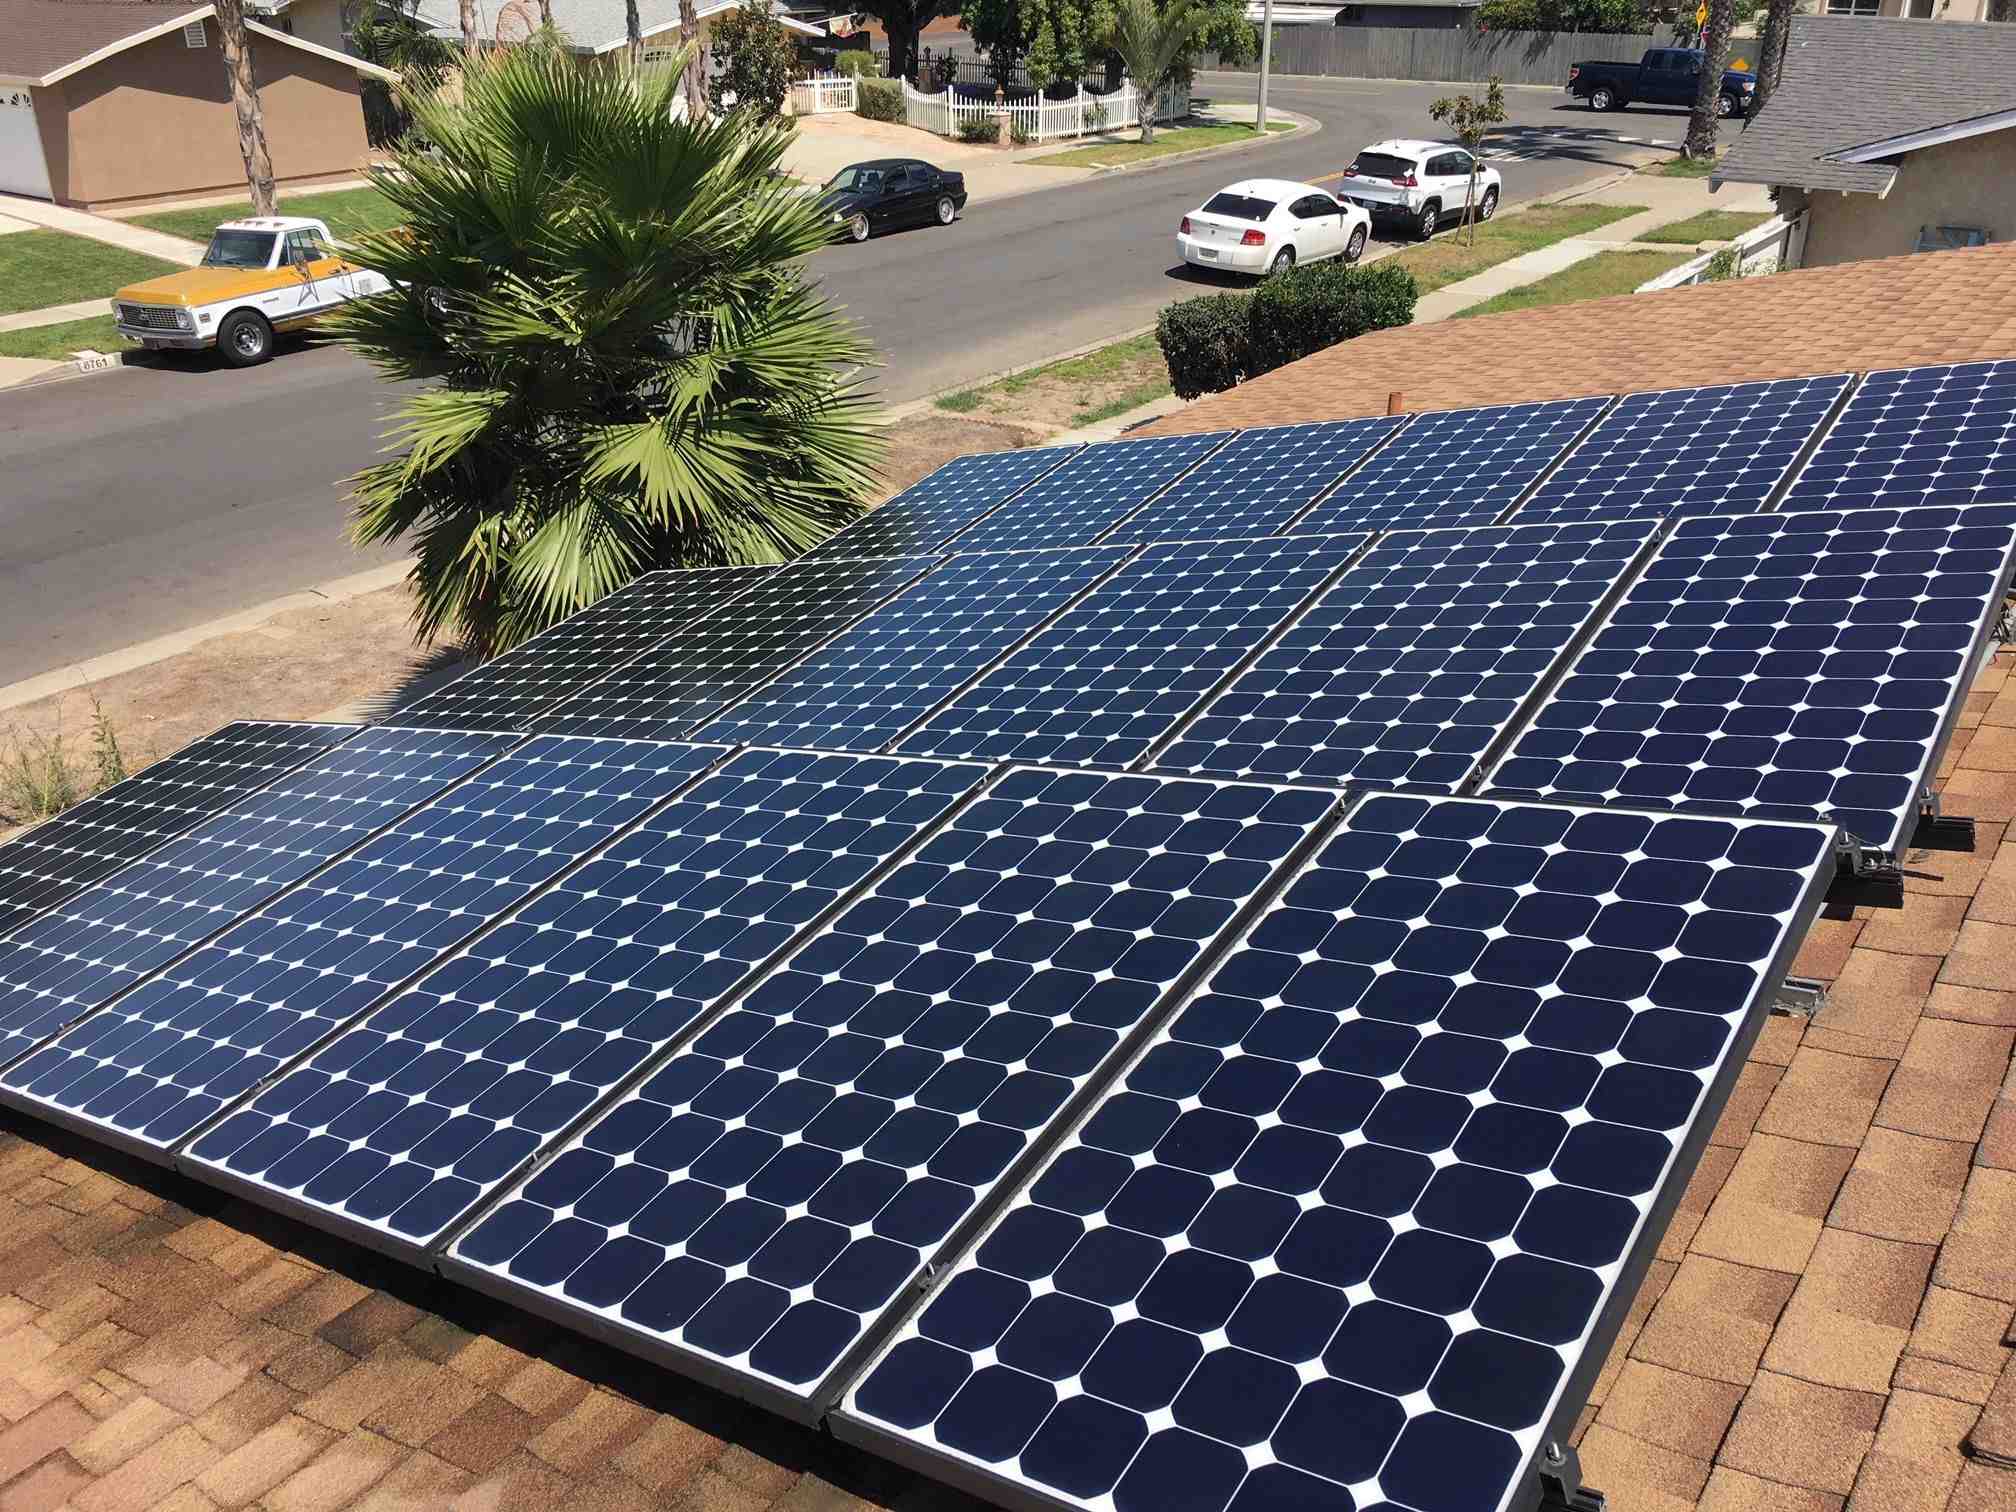 How much is the monthly payment for solar panels?